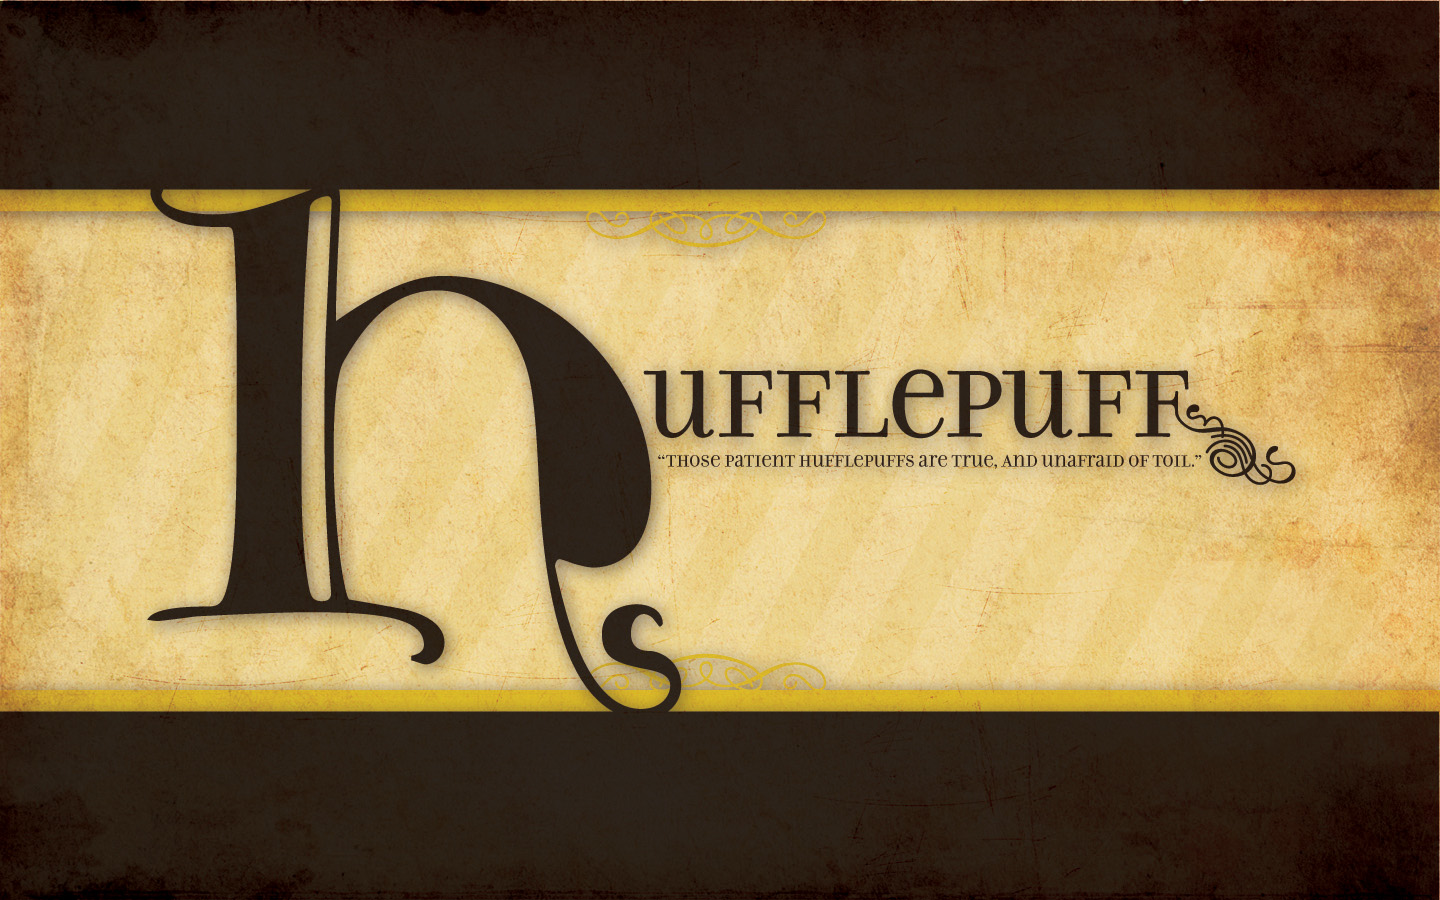 Hufflepuff Wallpaper wallpaper by MhmtGlyn  Download on ZEDGE  e2af